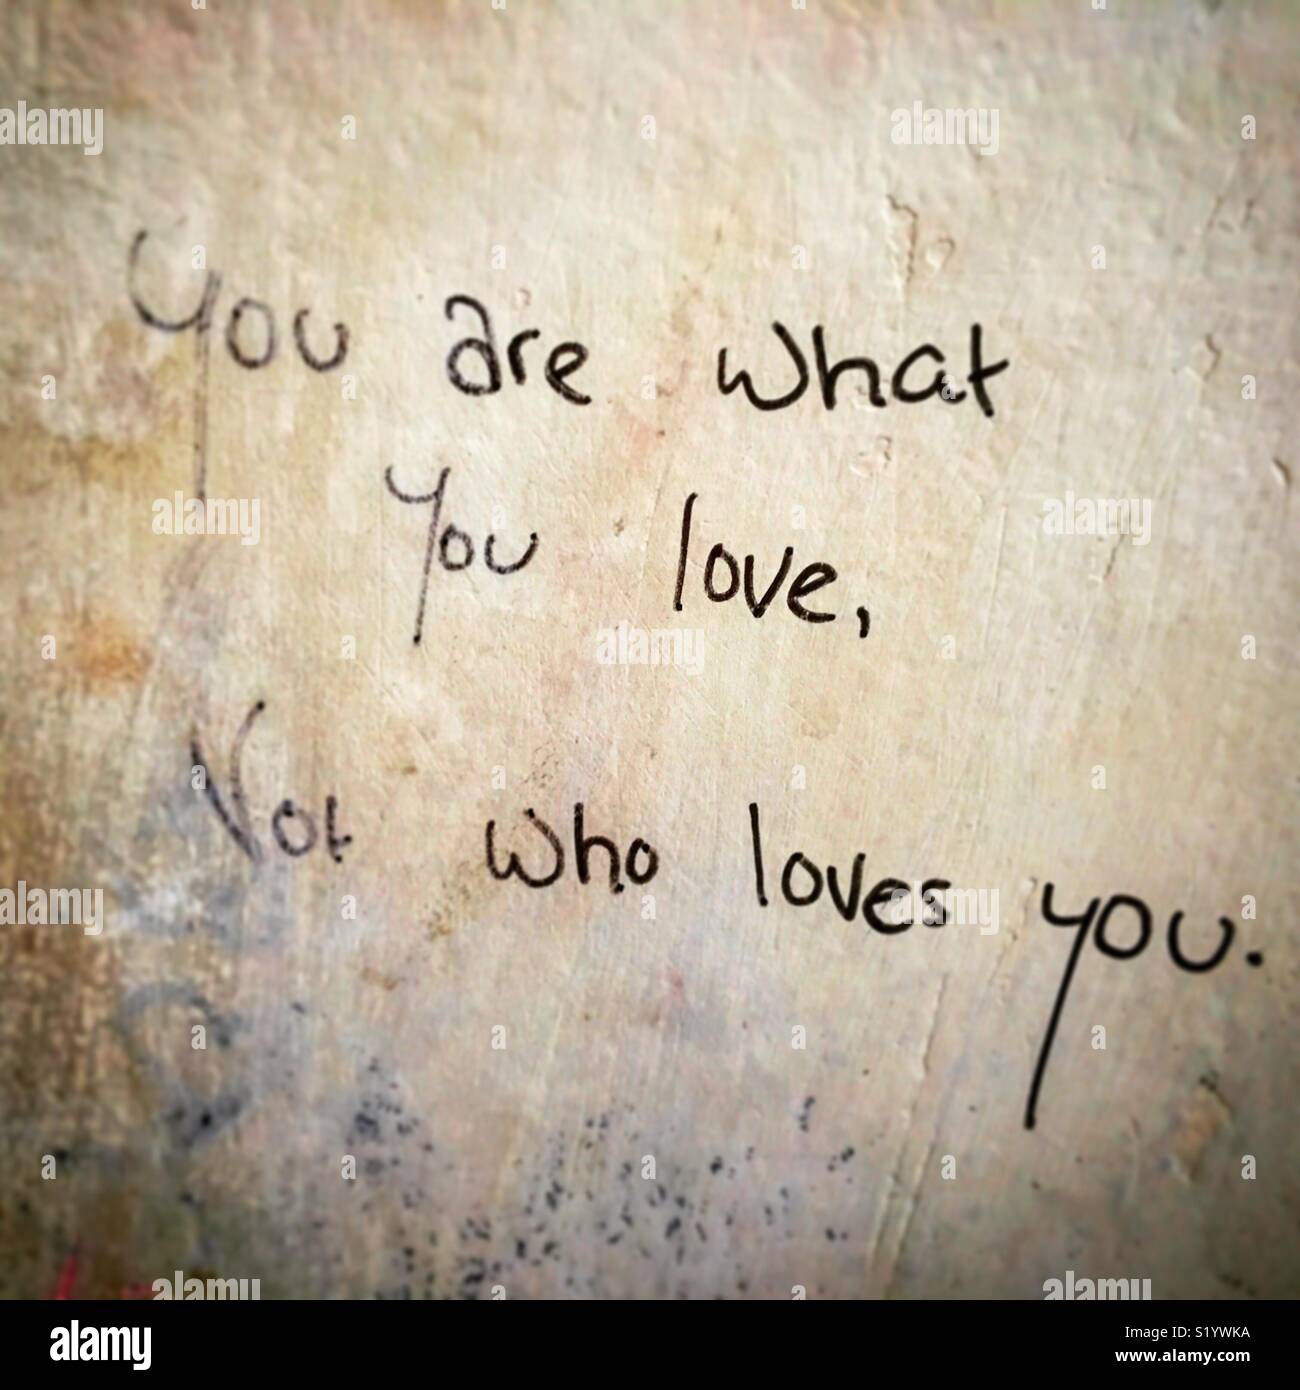 Quotes on a public wall about love and self awareness Stock Photo